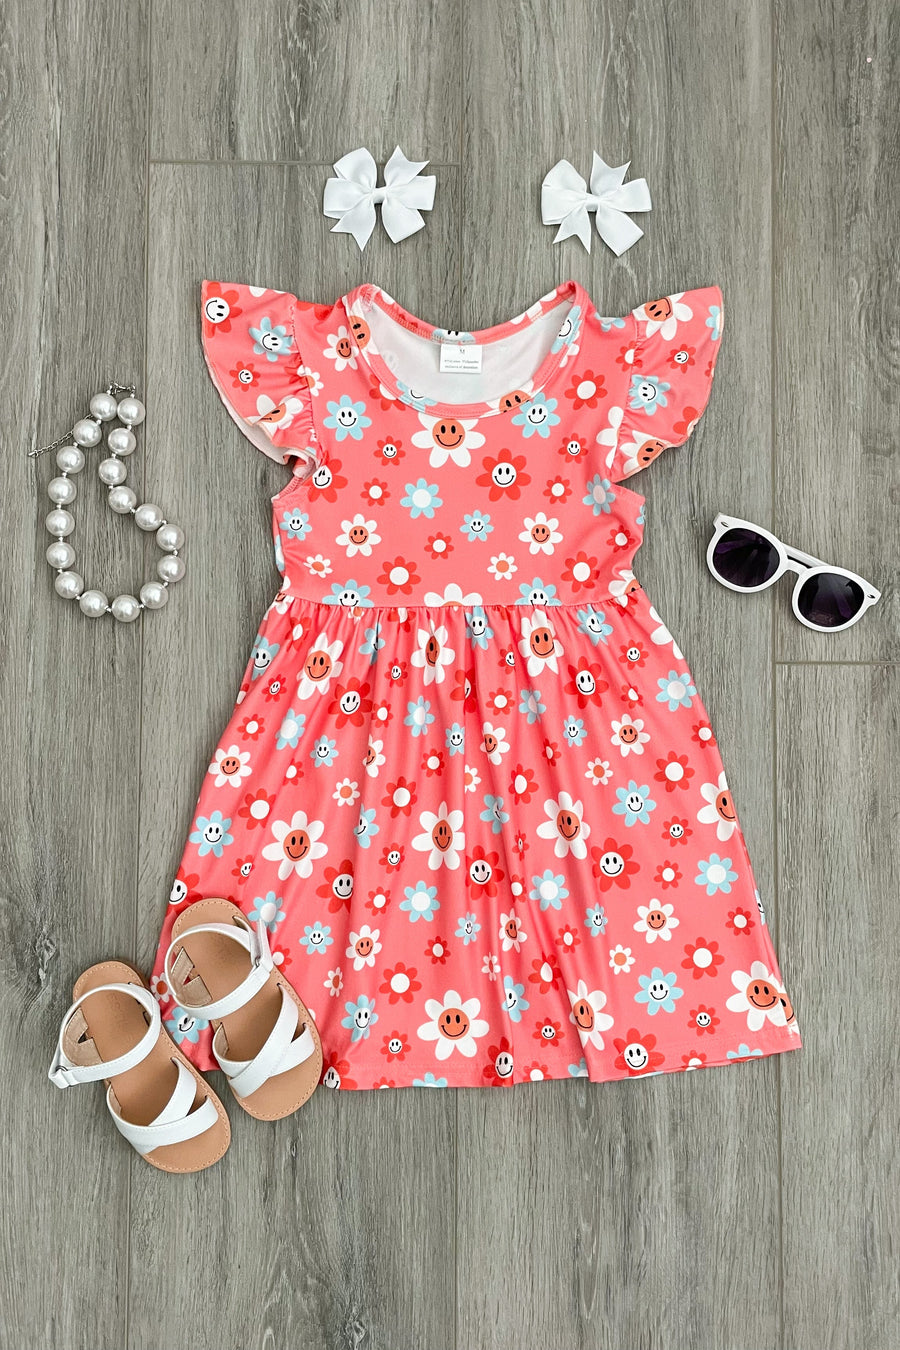 "Don't worry, be Happy" Boutique Dress - Rylee Faith Designs